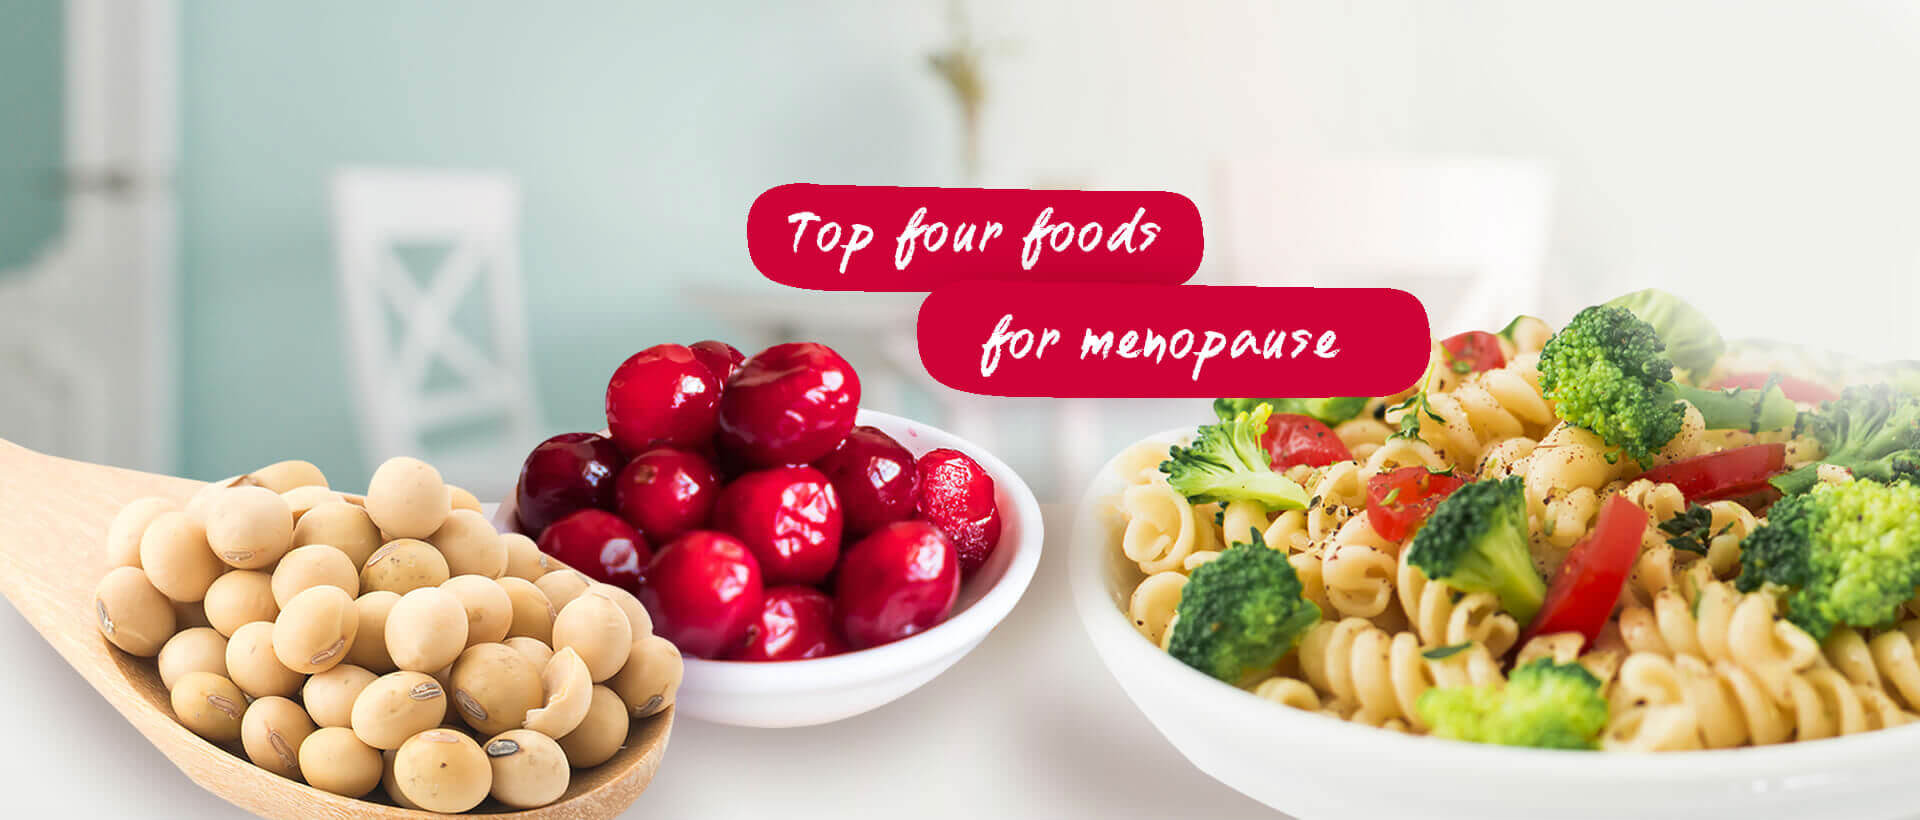 Top four foods for menopause